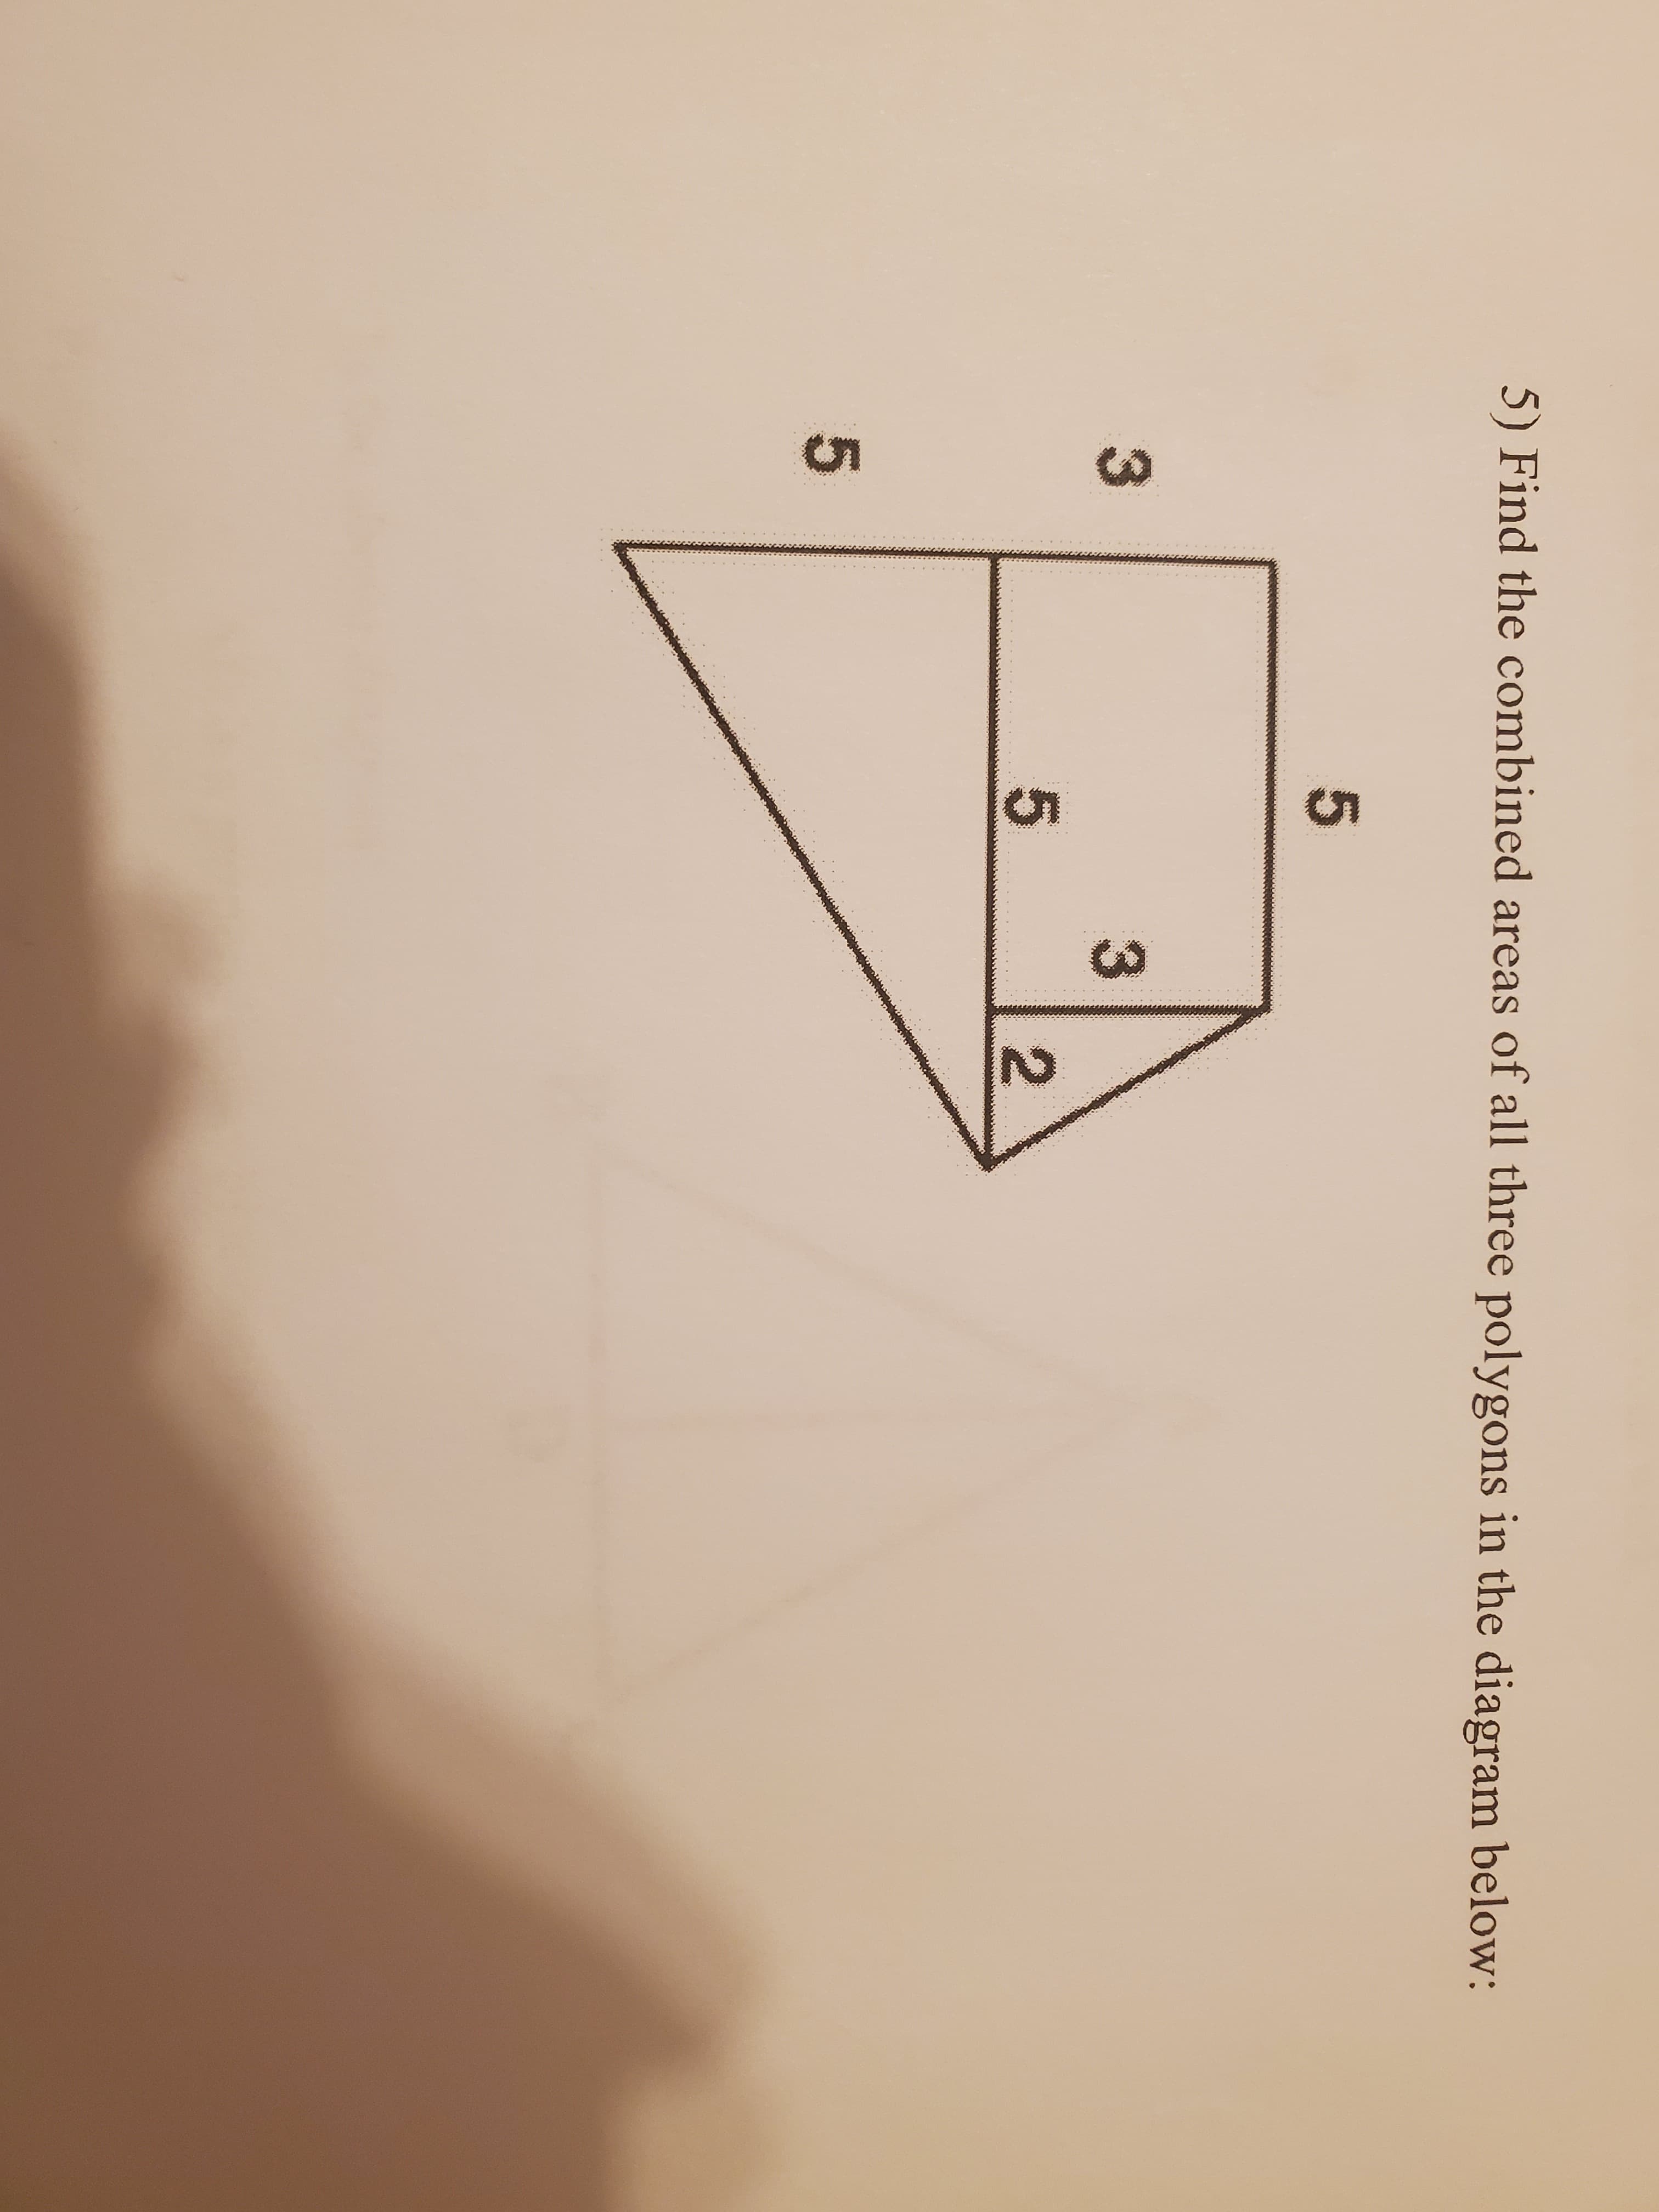 5) Find the combined areas of all three polygons in the diagram below:
3
5
2.
5
S.
